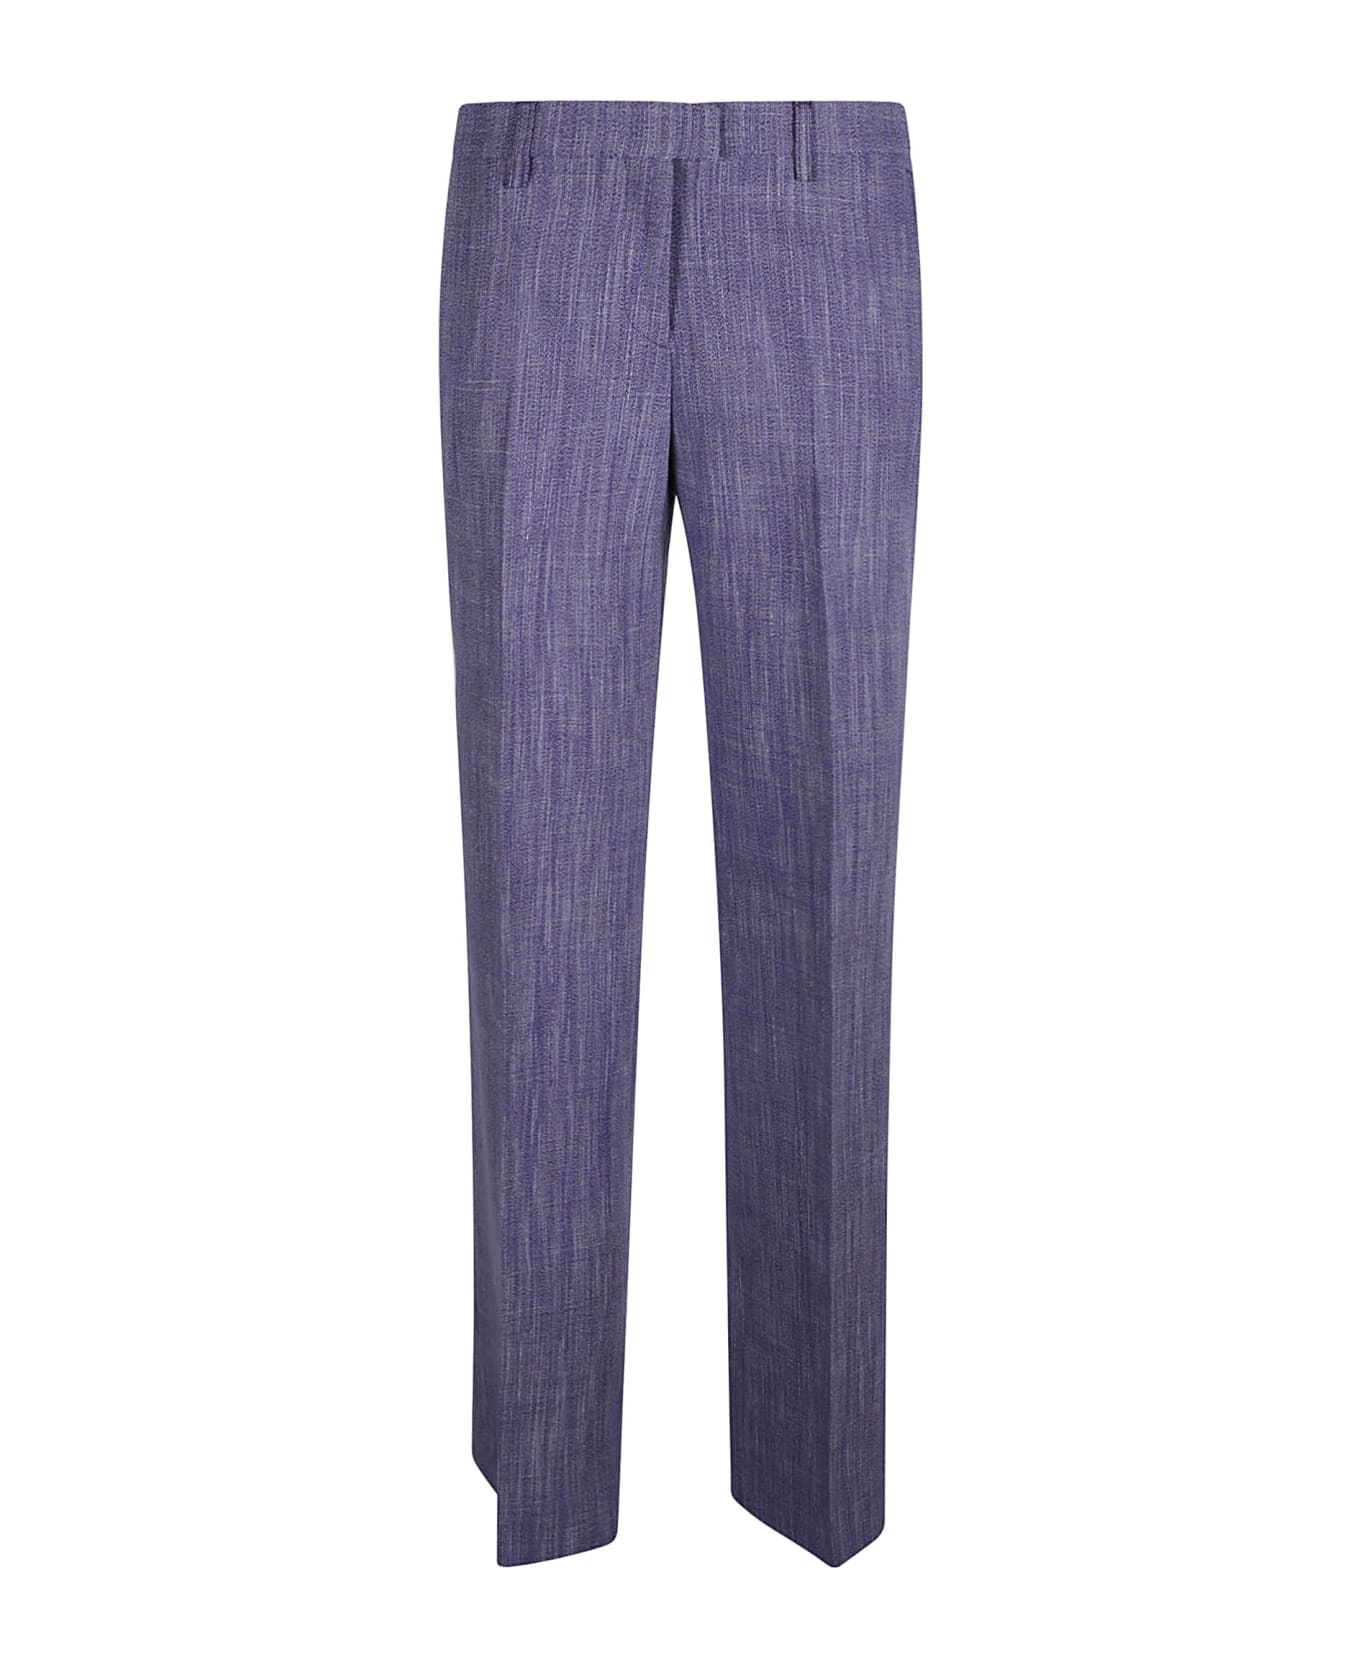 Etro Wrap Waist Trousers - Violet ボトムス